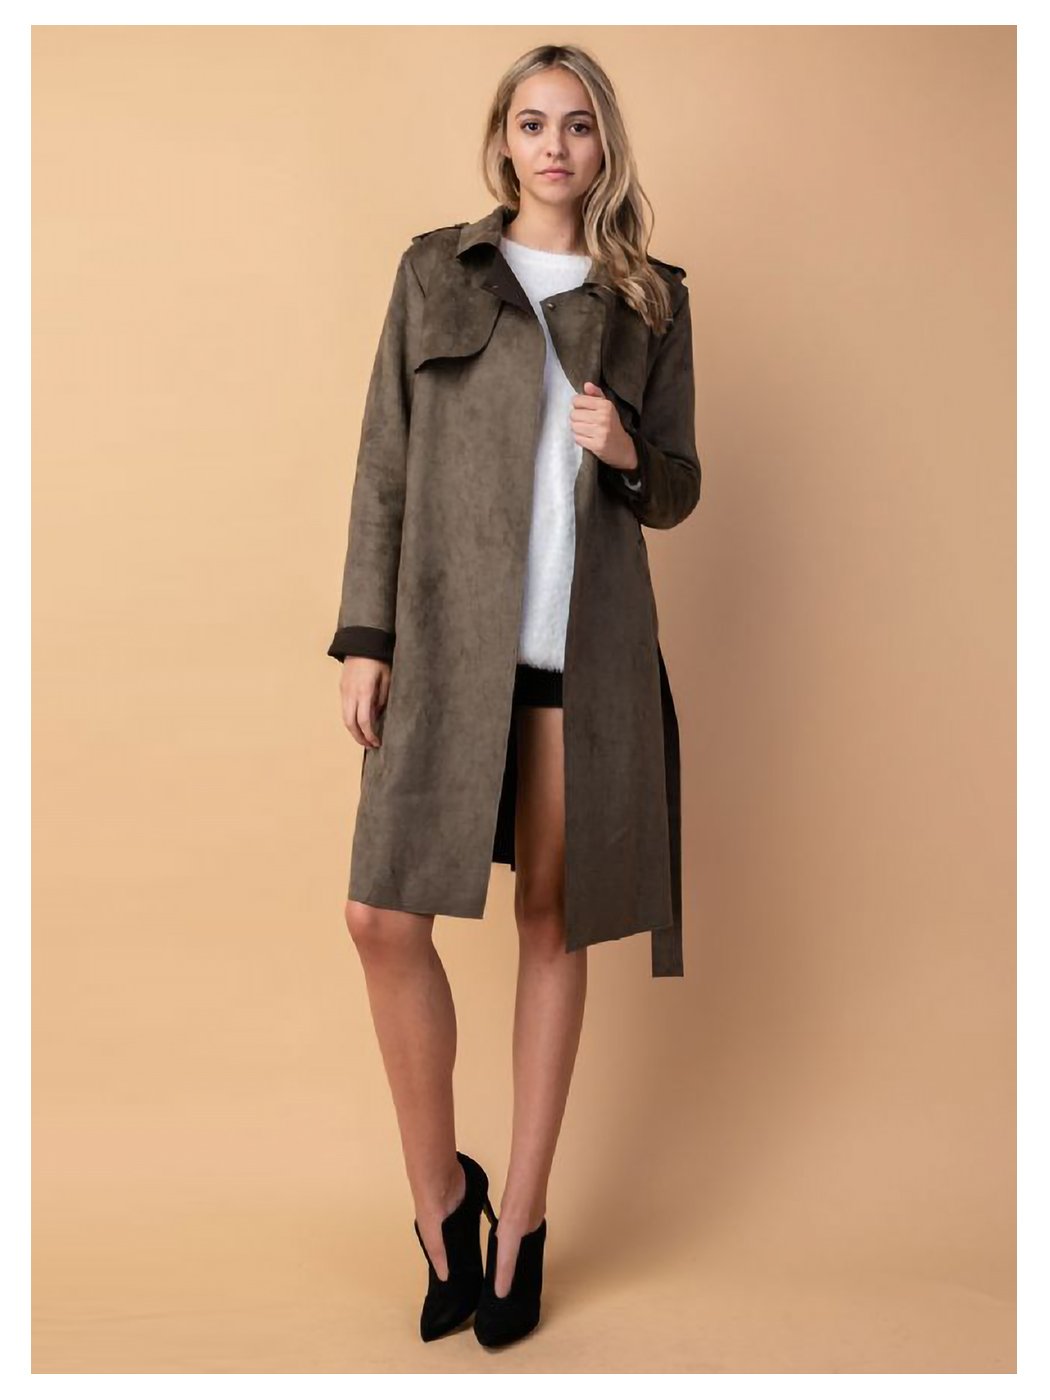 Vegan Leather Suede Belted Trench Coat